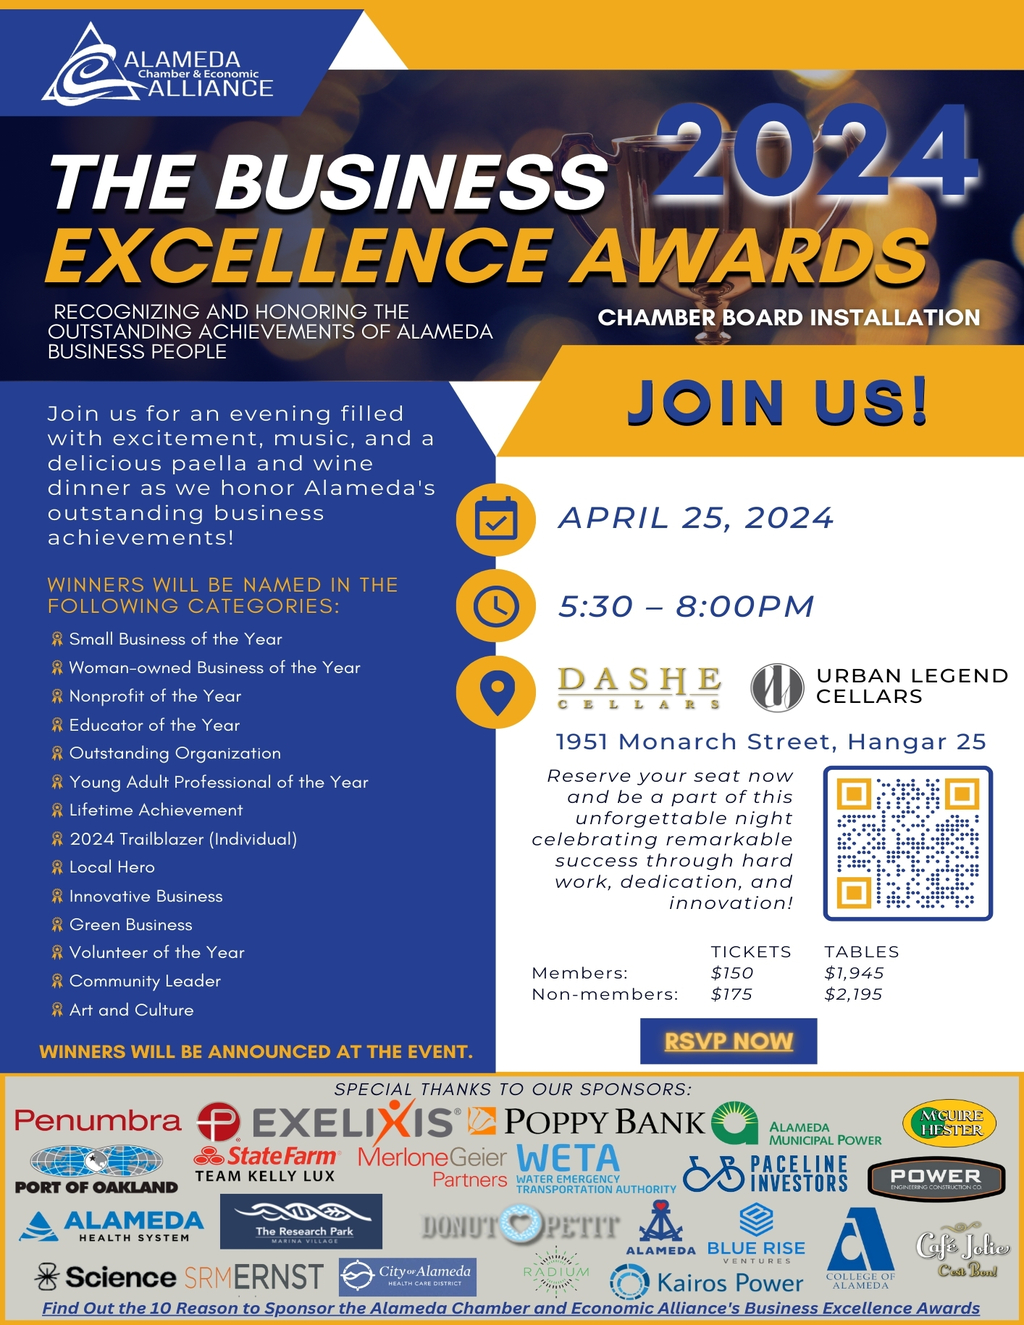 Alameda Chamber Of Commerce Join us for the 2024 Excellence Awards promotion flier on Digifli com